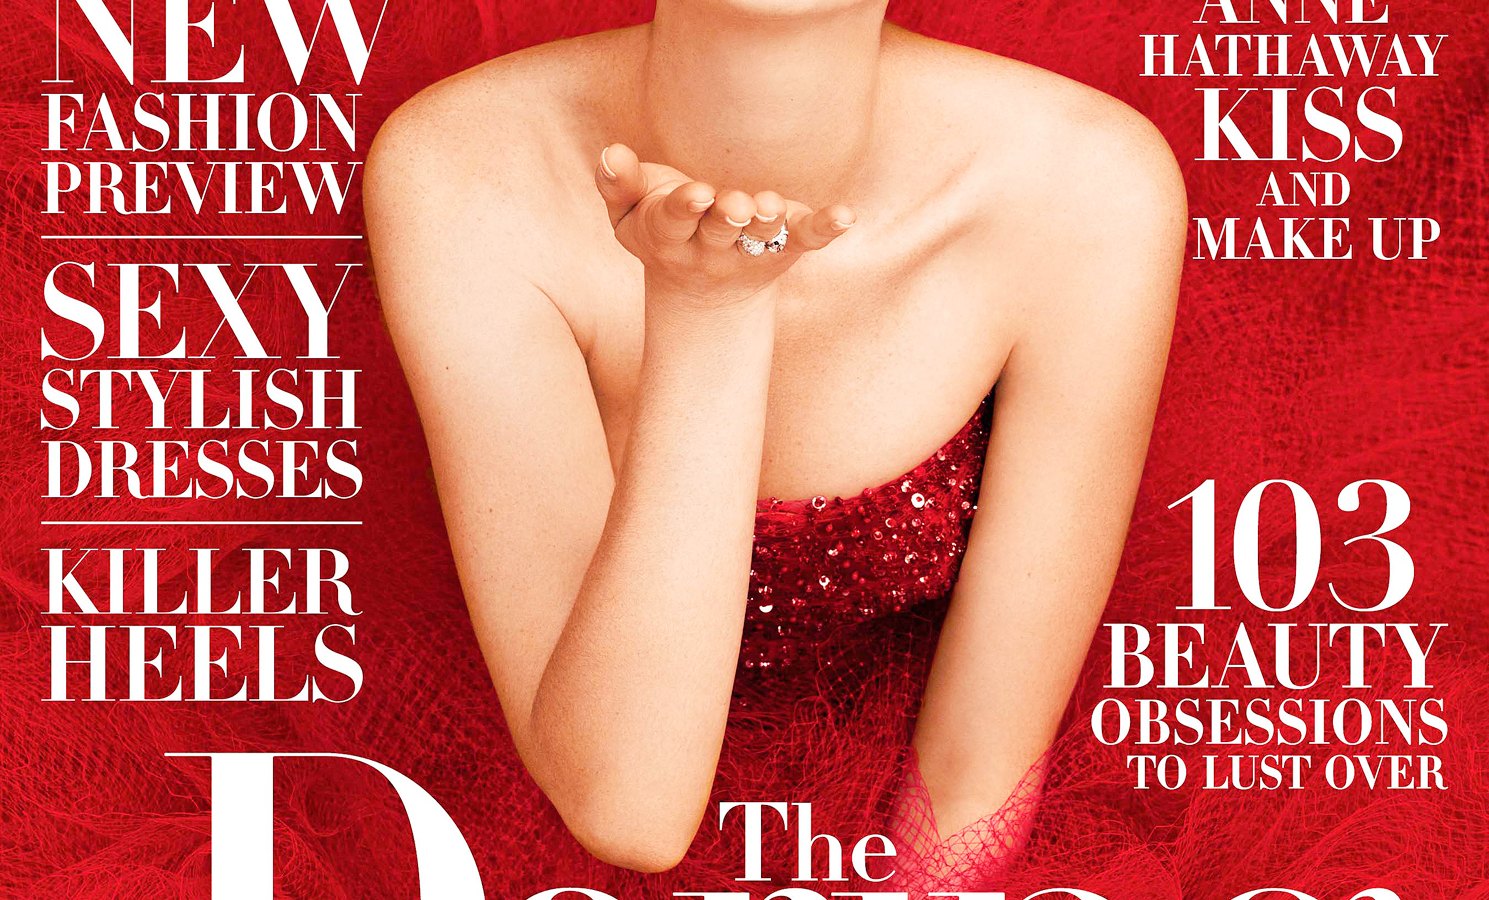 Anne Hathaway on the cover of Harper's Bazaar